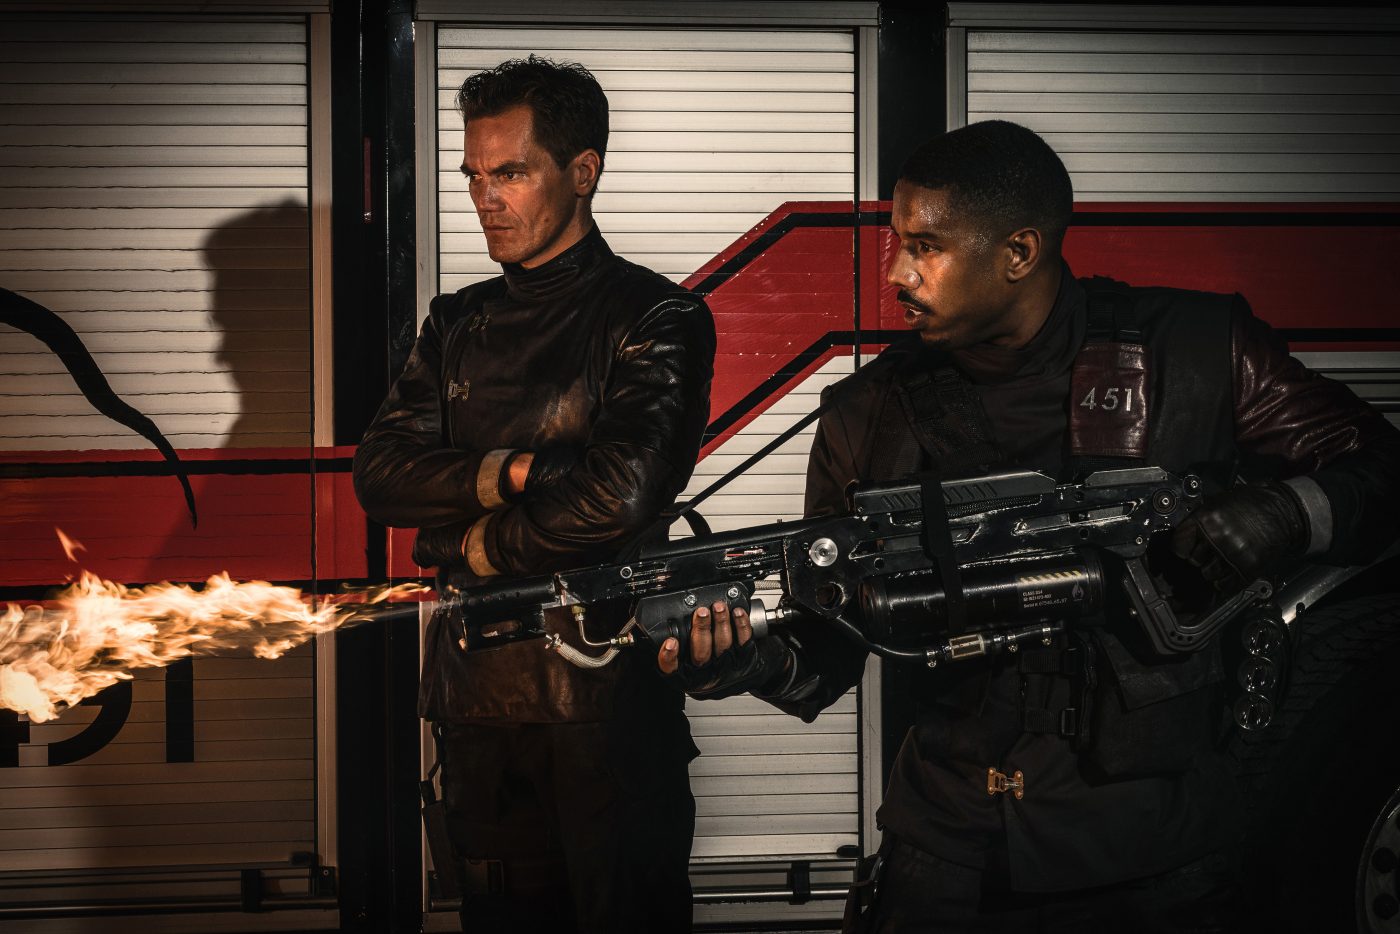 The Meaning Behind the Emmy Nominated Fahrenheit 451 'Firemen' Uniforms